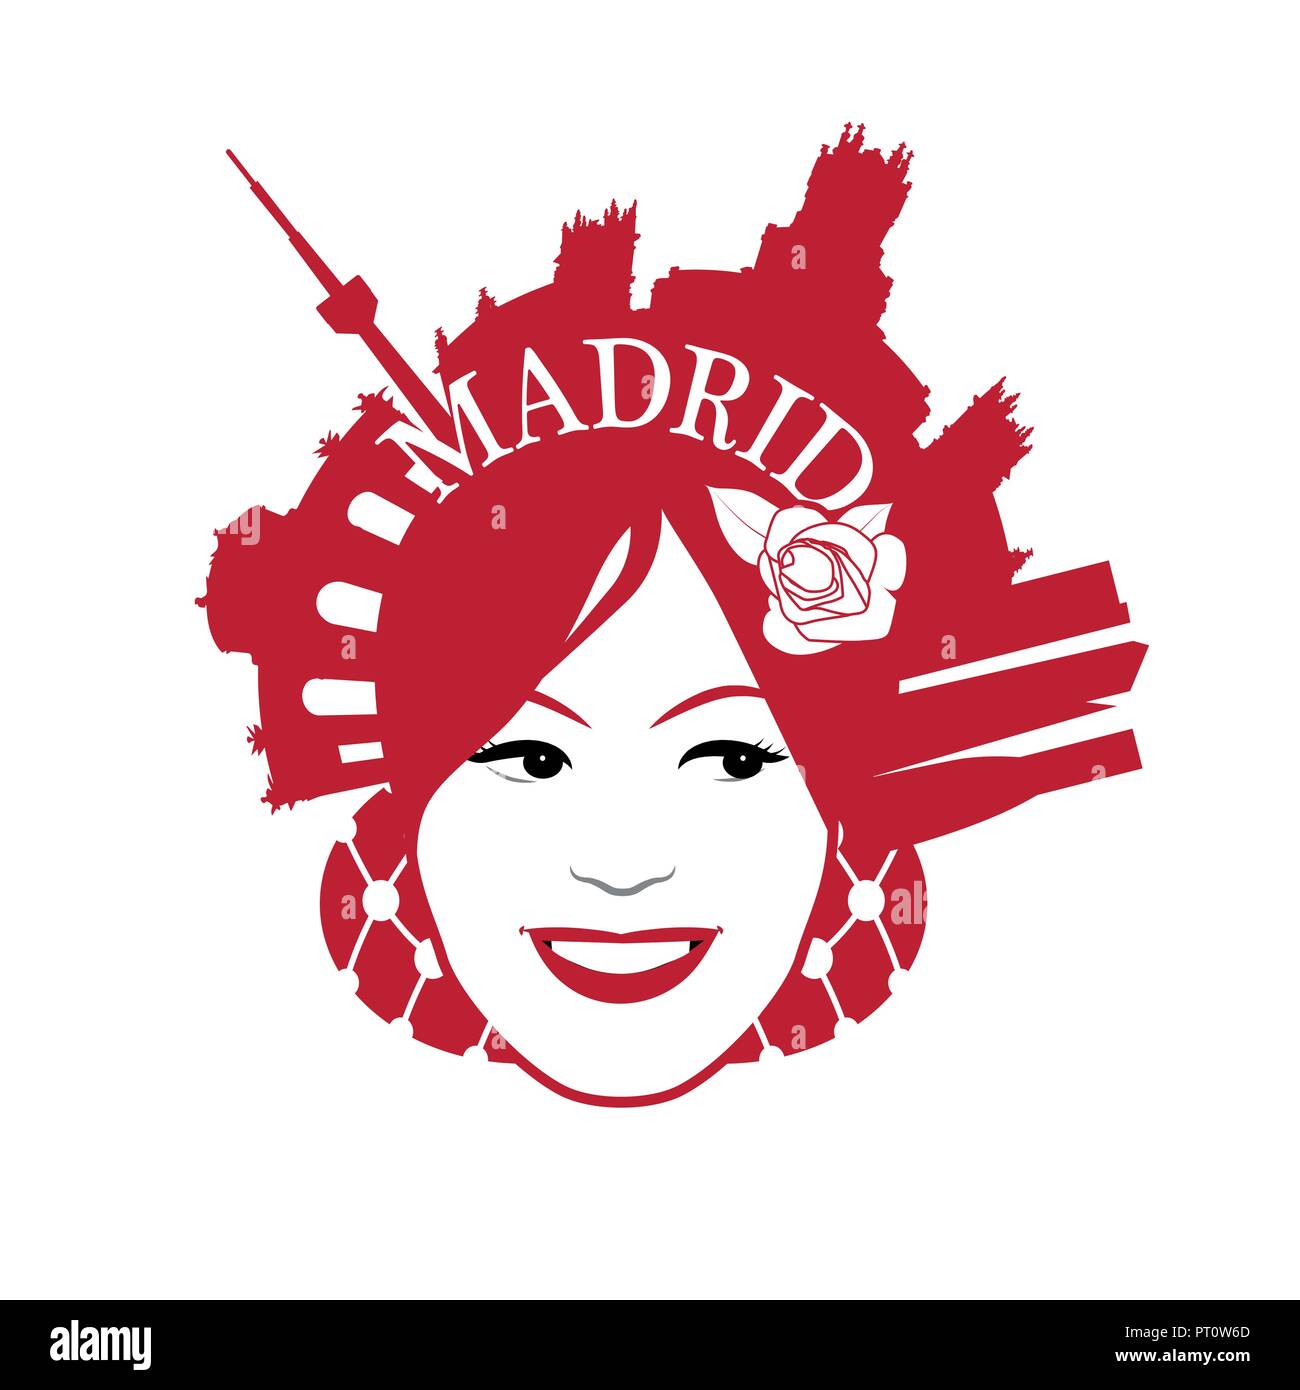 Symbolic image of Madrid. Woman wearing comb with Madrid monuments Stock Vector